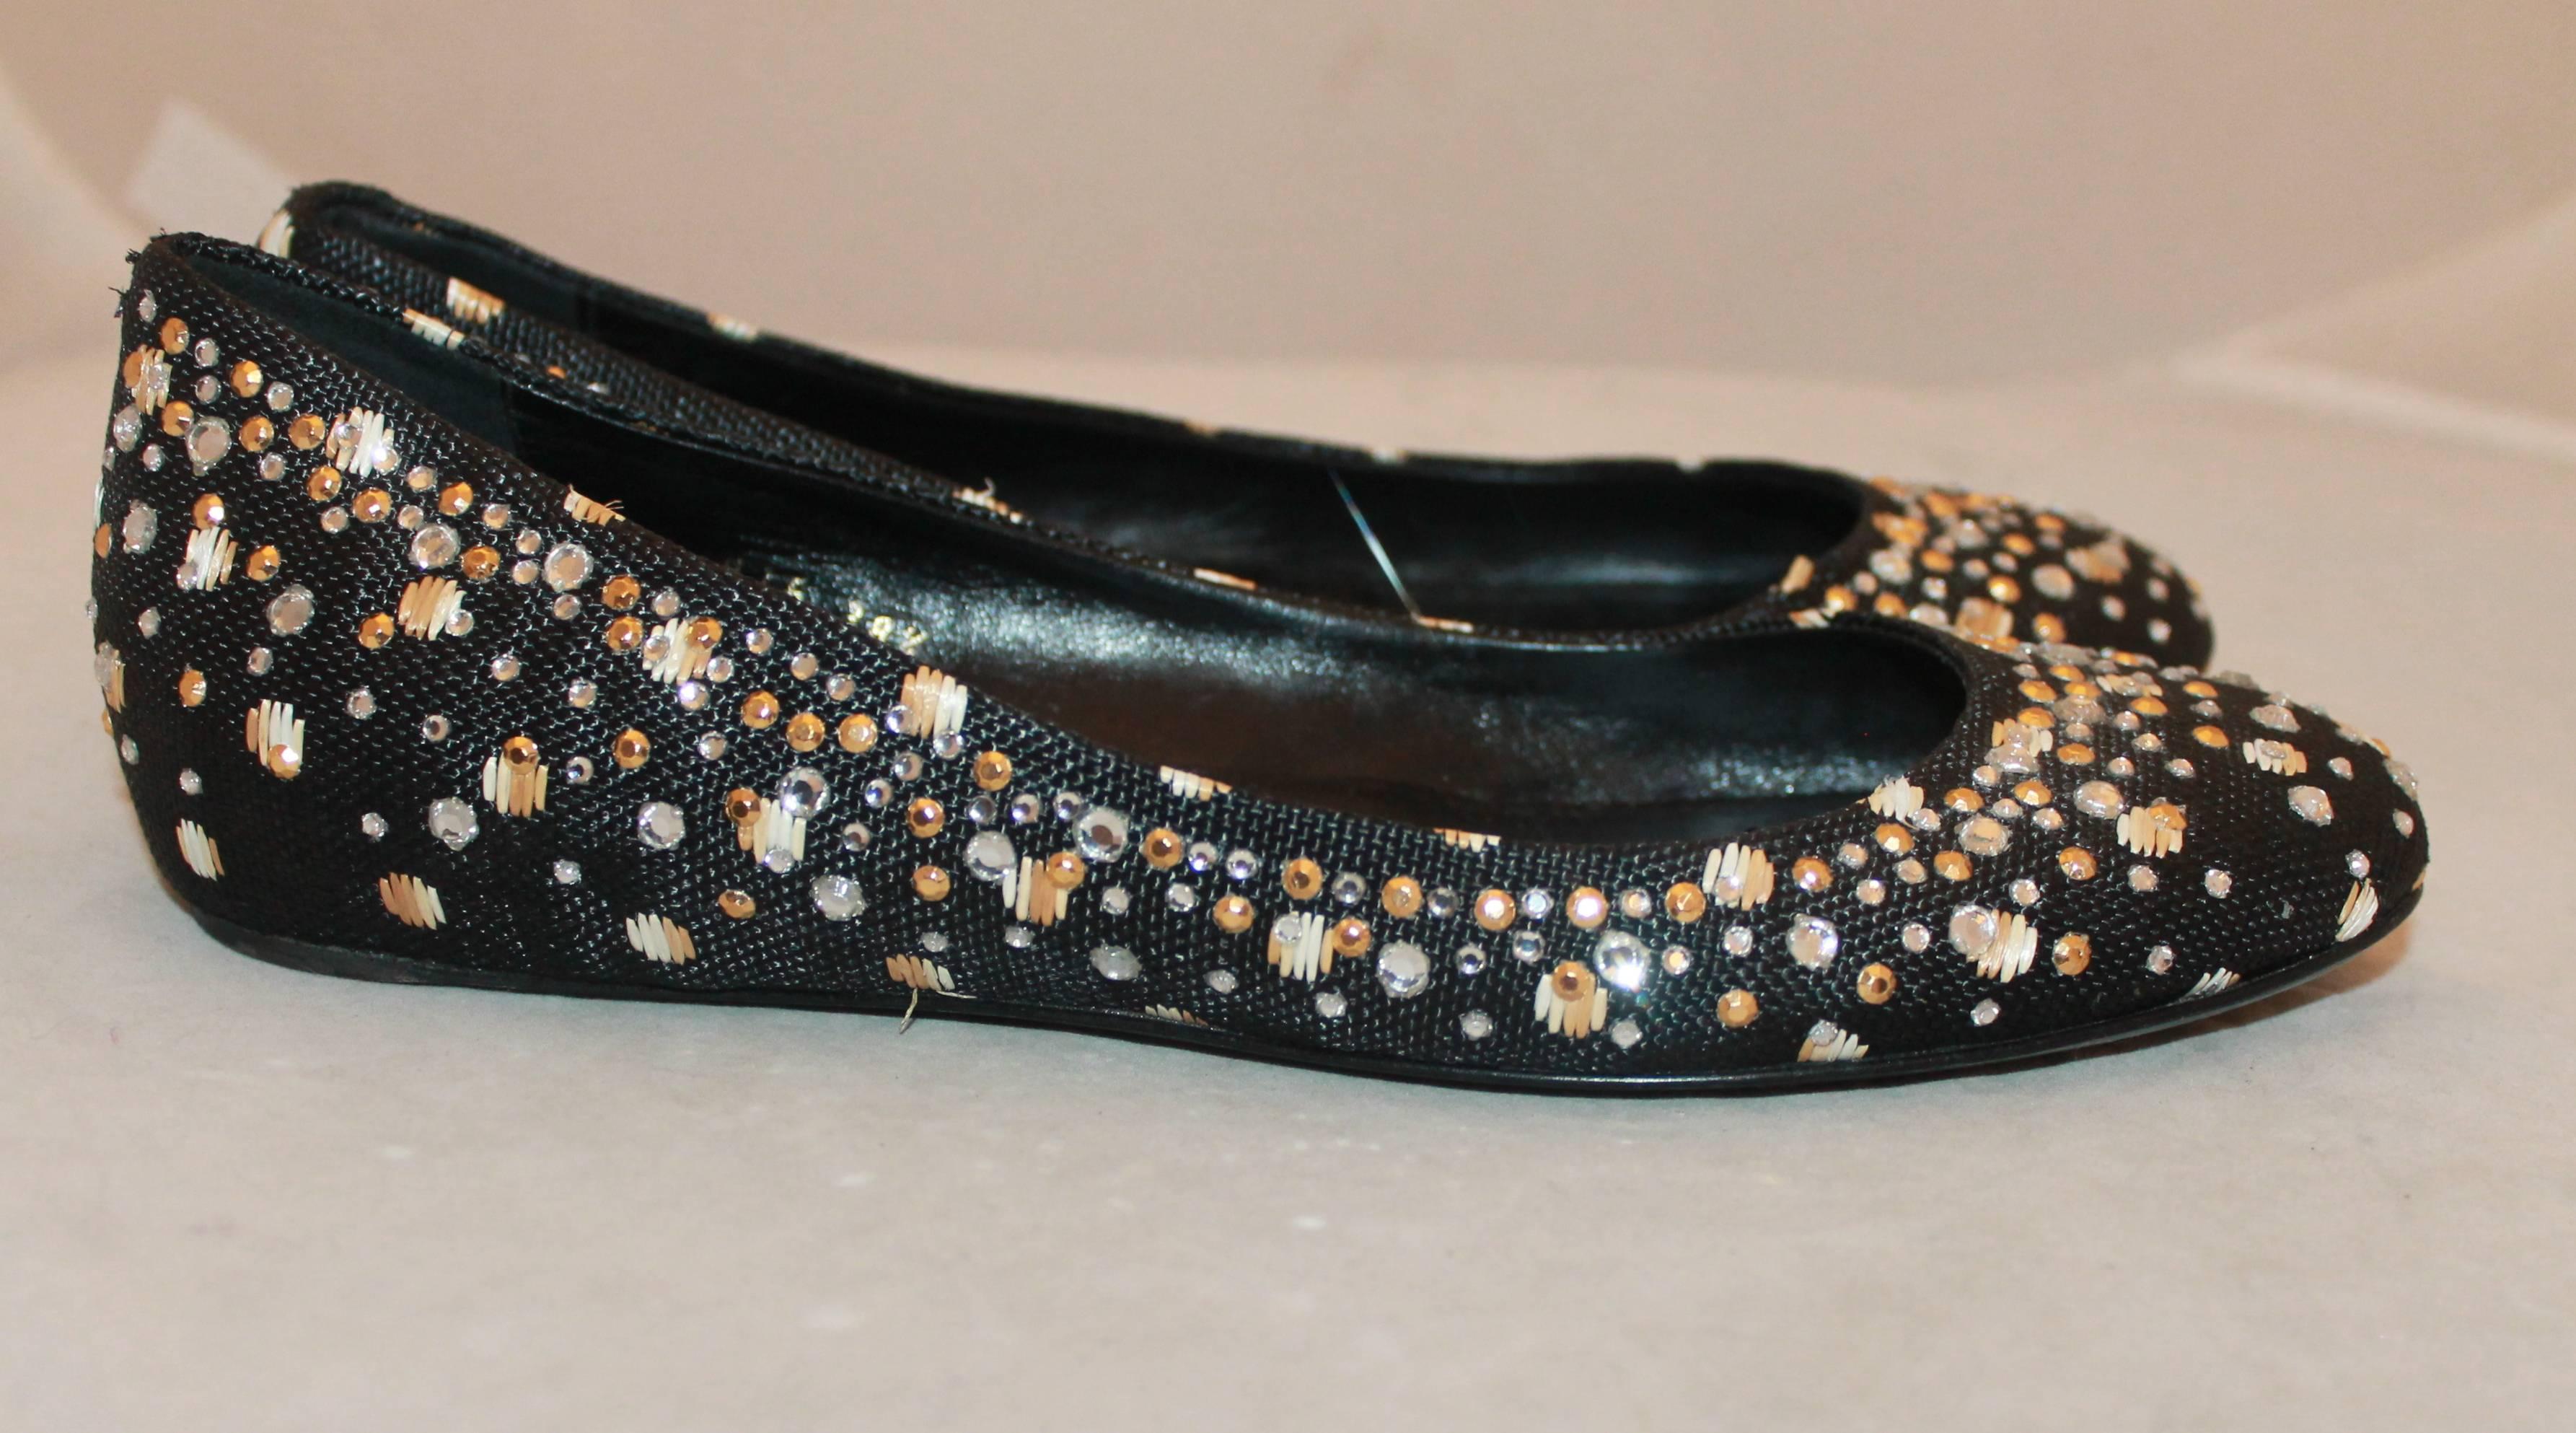 Valentino Black Raffia Ballerina Style Flats w/ Rhinestones - 38.5.  These shoes are in very good condition with some wear to the sole consistent with their use.  They feature a lovely black raffia material, a ballerina style look, and some